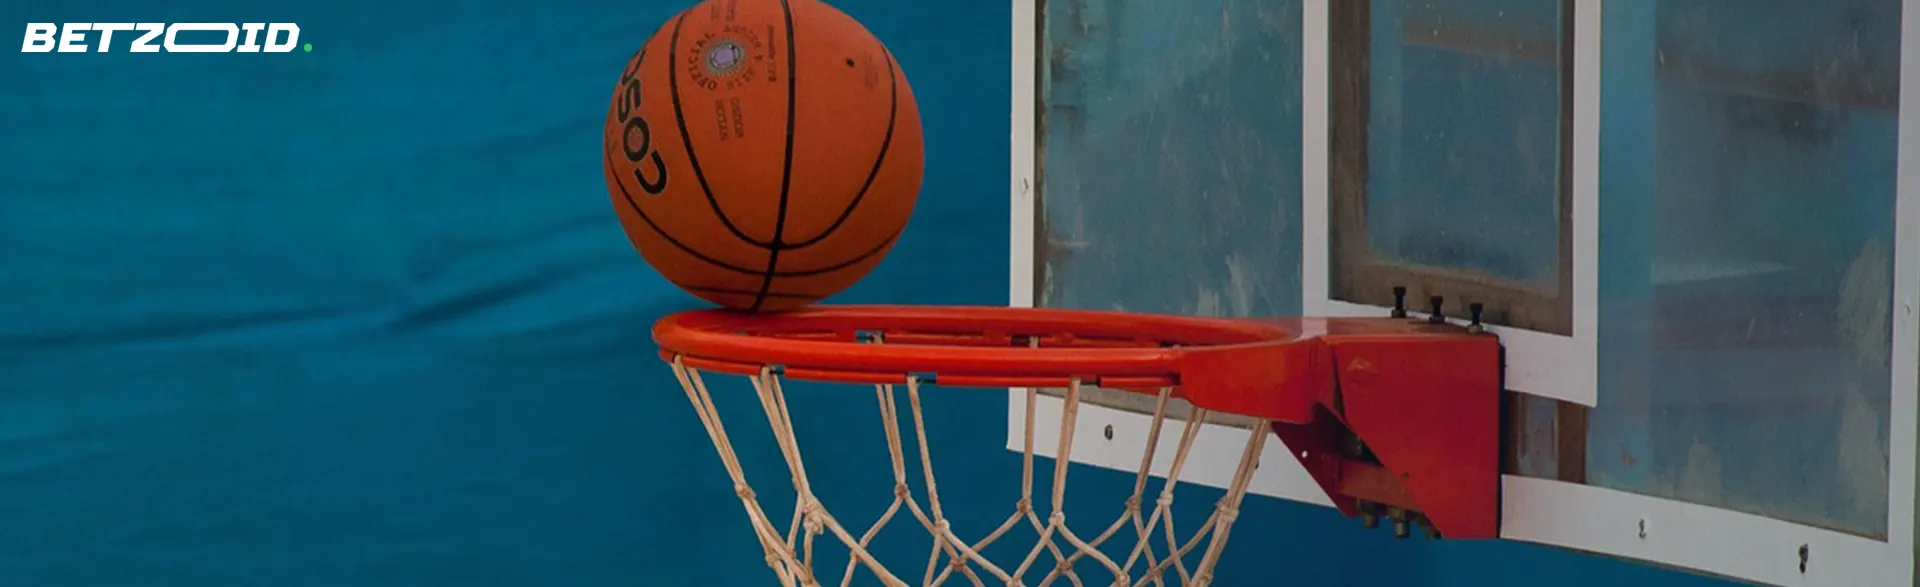 A basketball poised on the rim of a red basketball hoop against a blurred blue background.